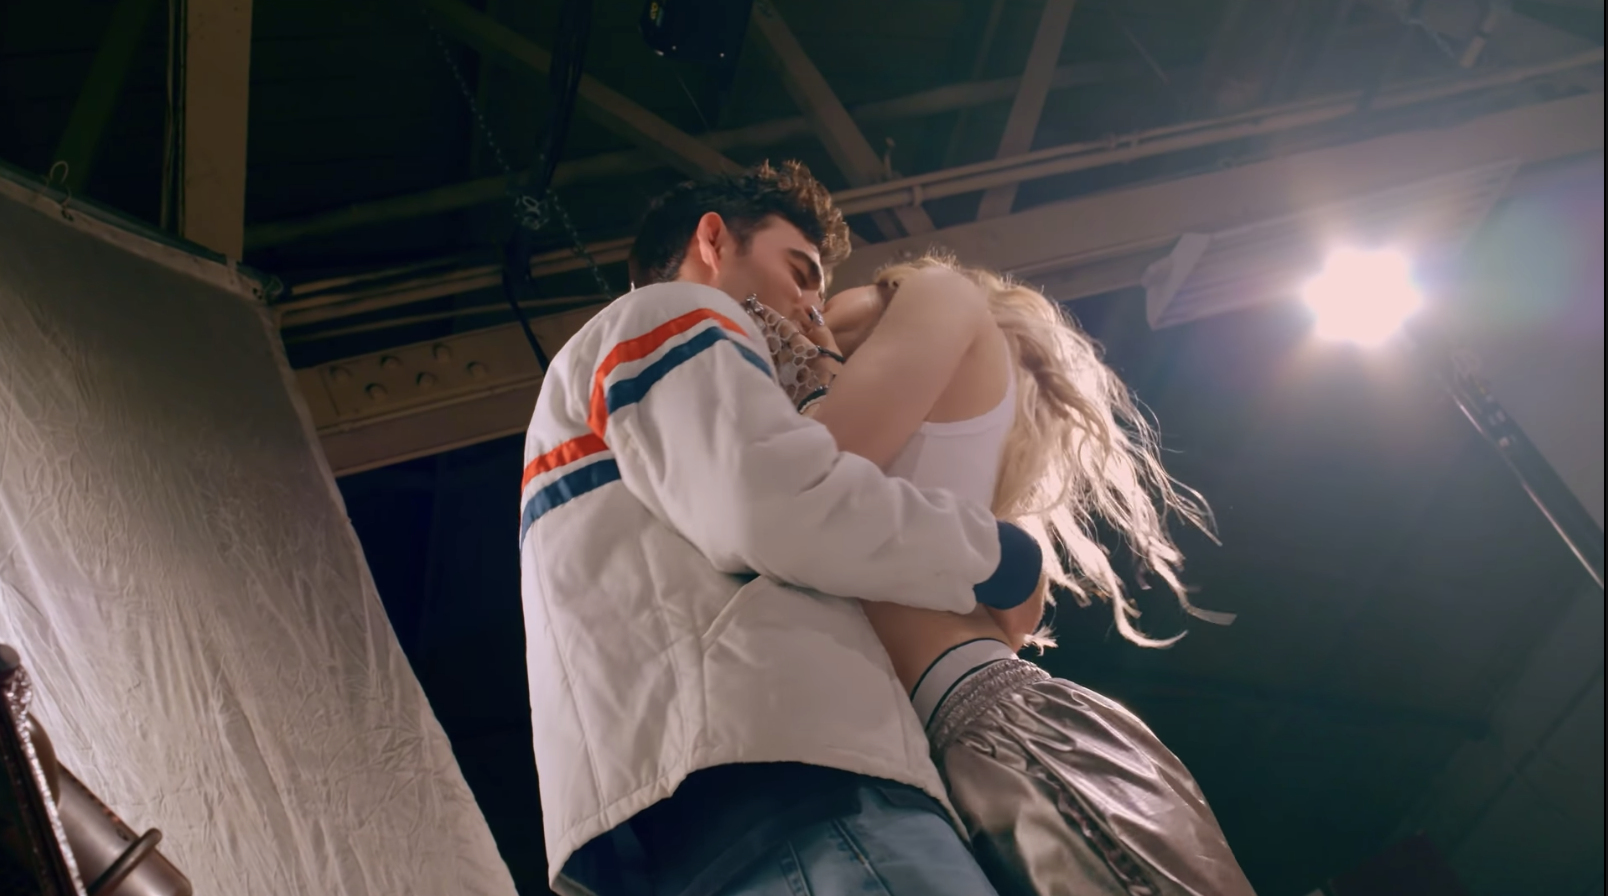 Dove kissing Alexander23 in the &quot;LazyBaby&quot; music video